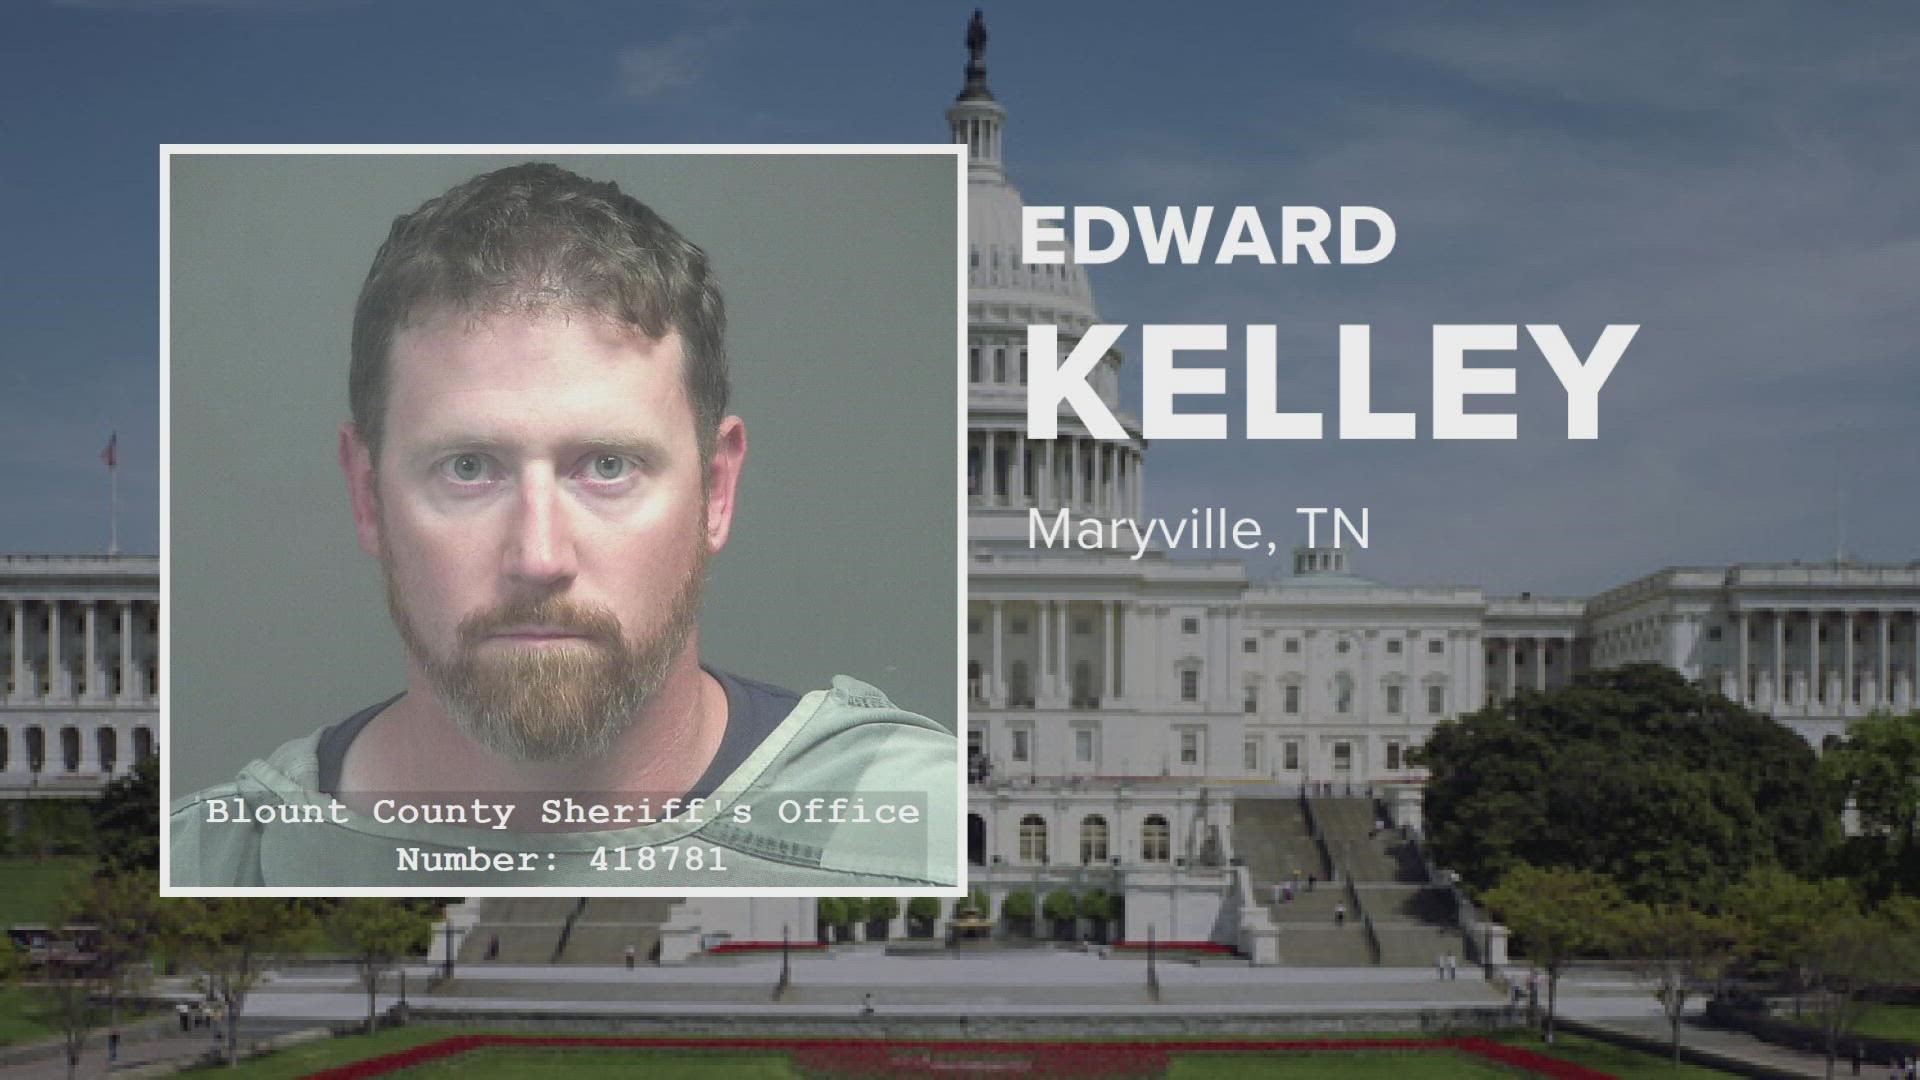 We take a look at people from East Tennessee who are charged with taking part in the Capitol riots in 2020.